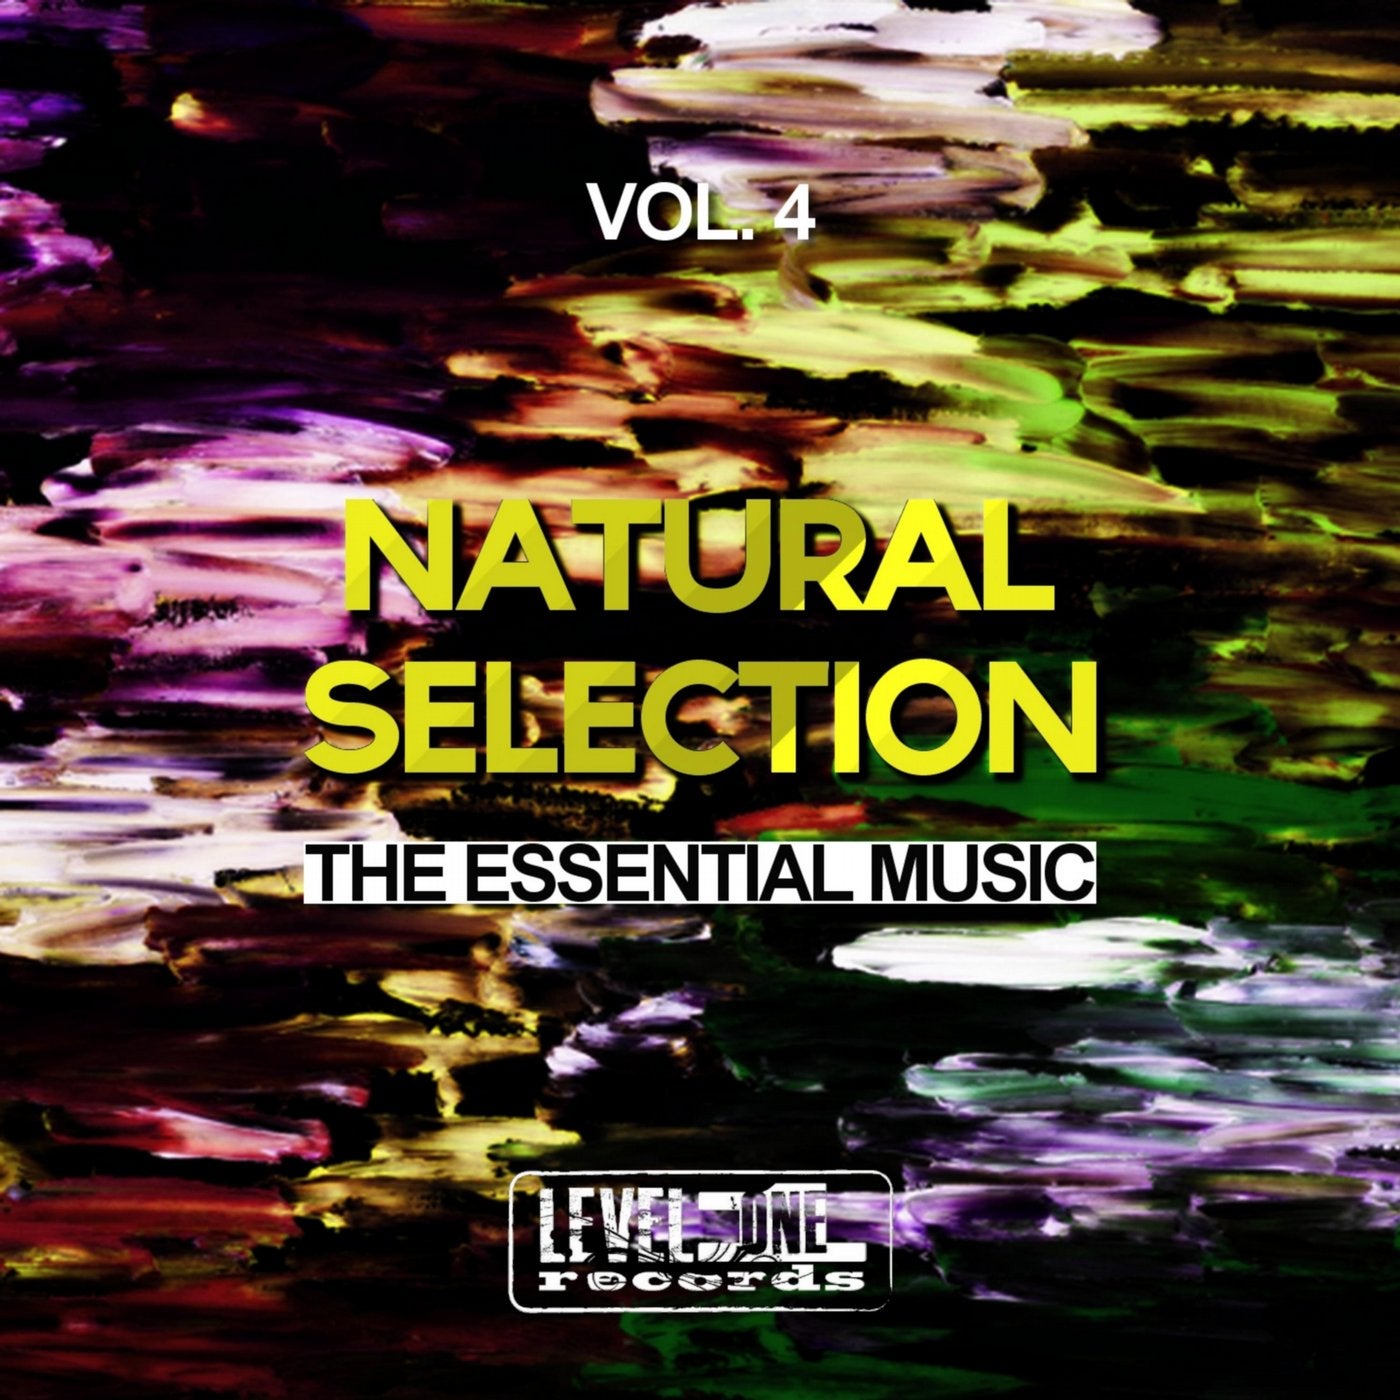 Natural Selection, Vol. 4 (The Essential Music)